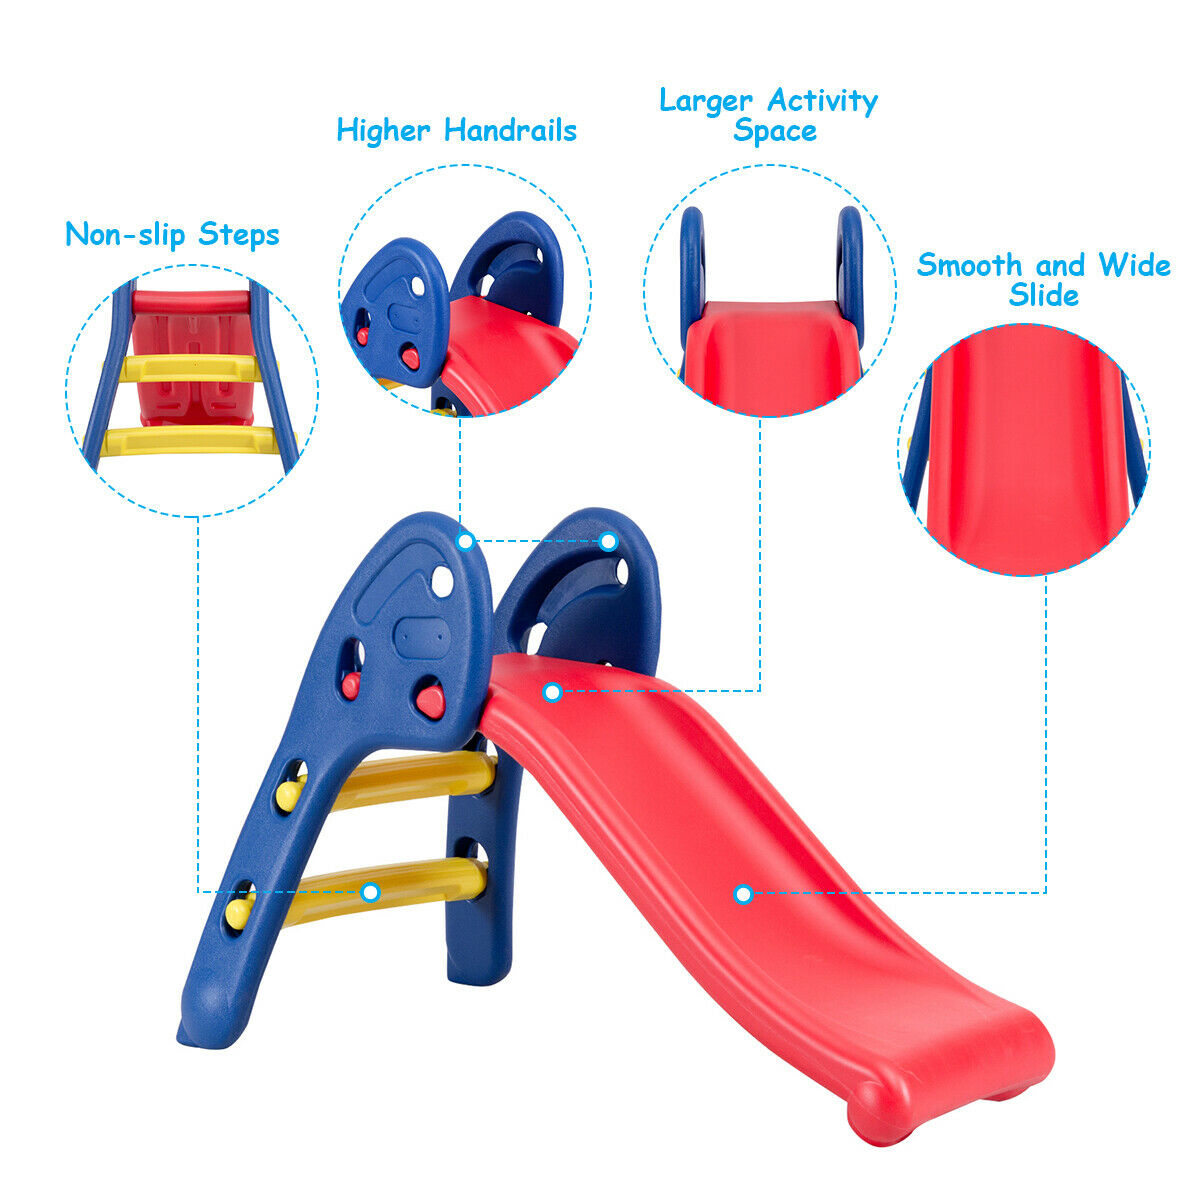 Gymax 2 Step Children Folding Slide Plastic Fun Toy Up-down For Kids Indoor & Outdoor - image 4 of 10